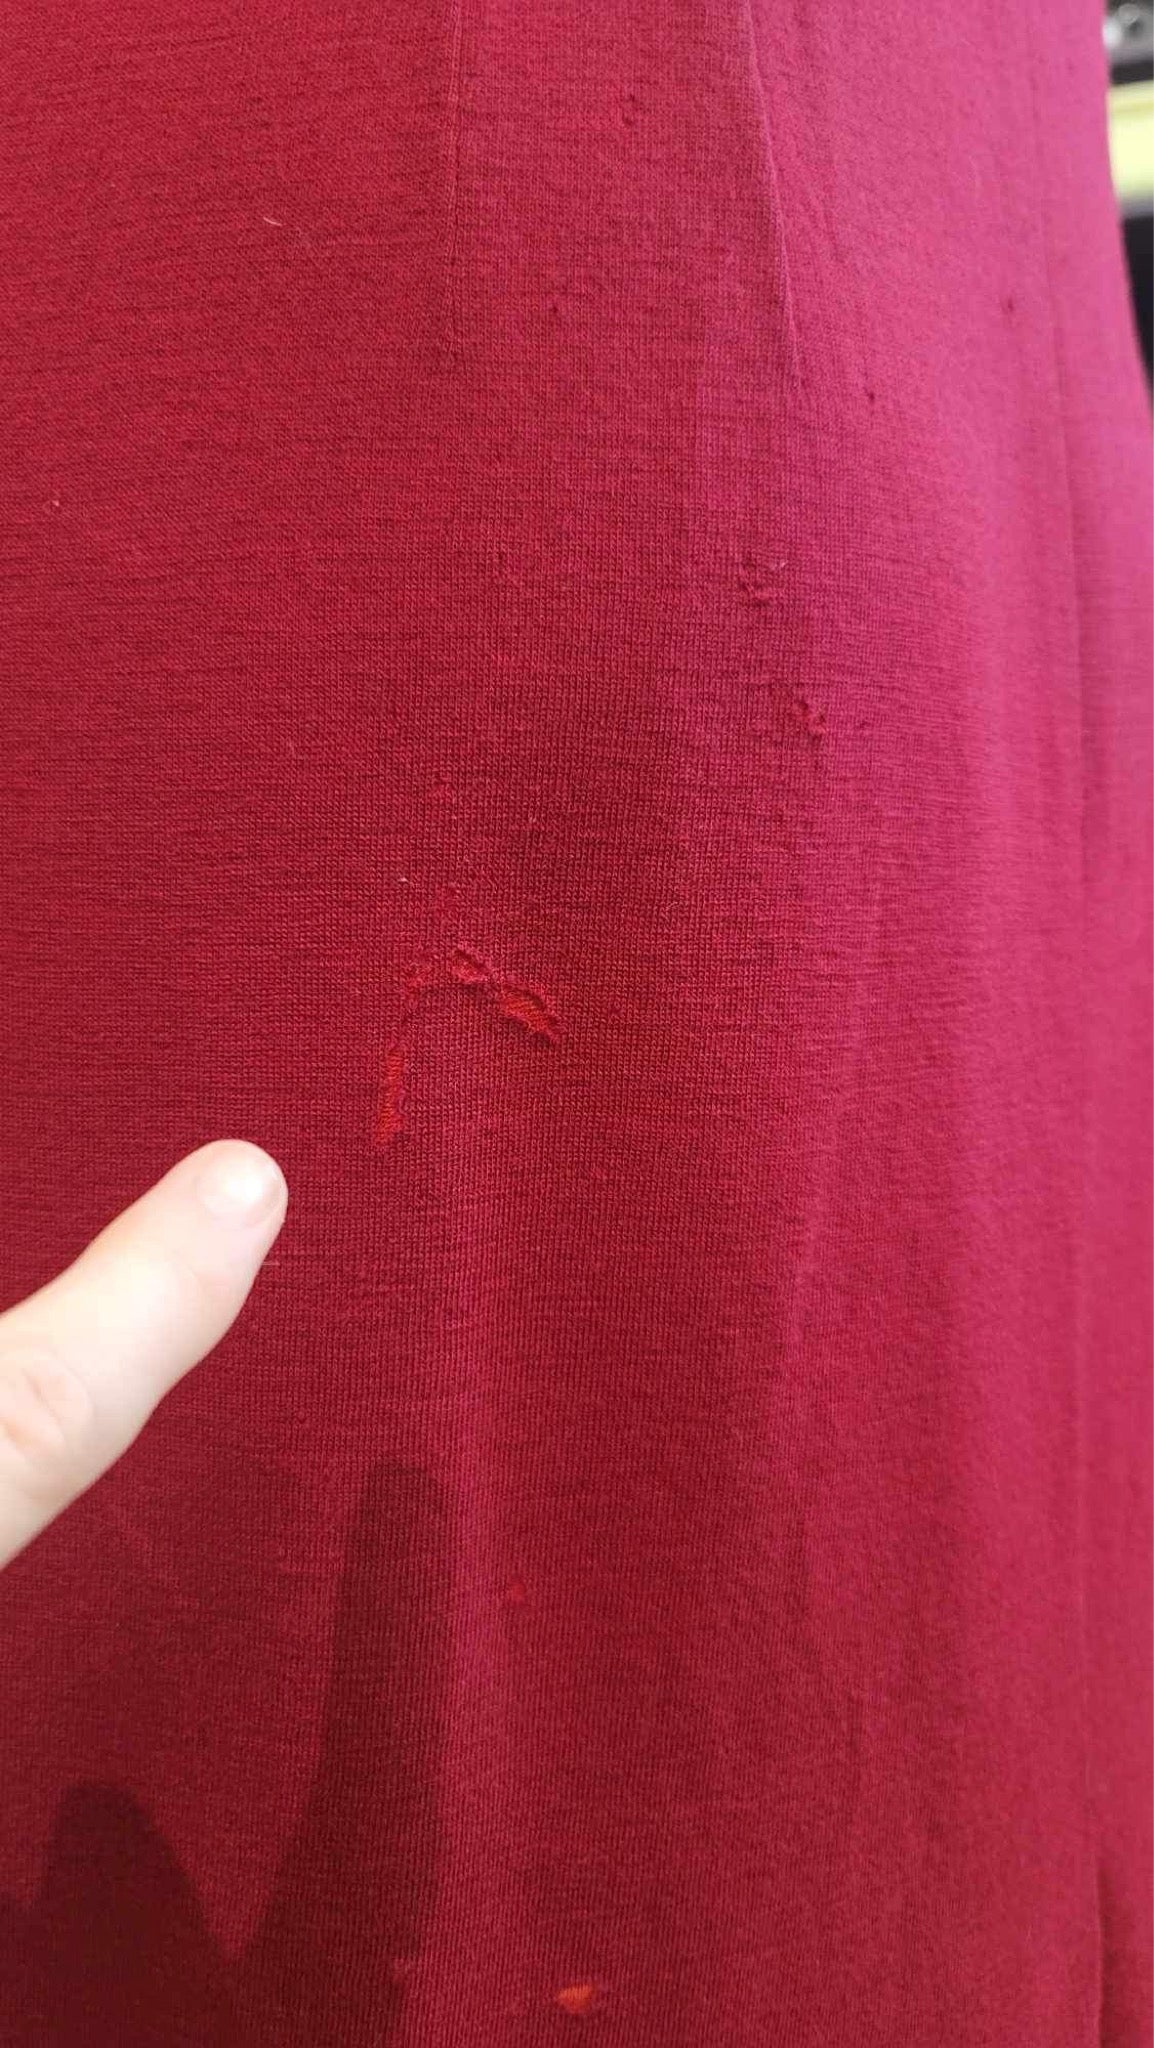 Severely Wounded Burgandy Dress